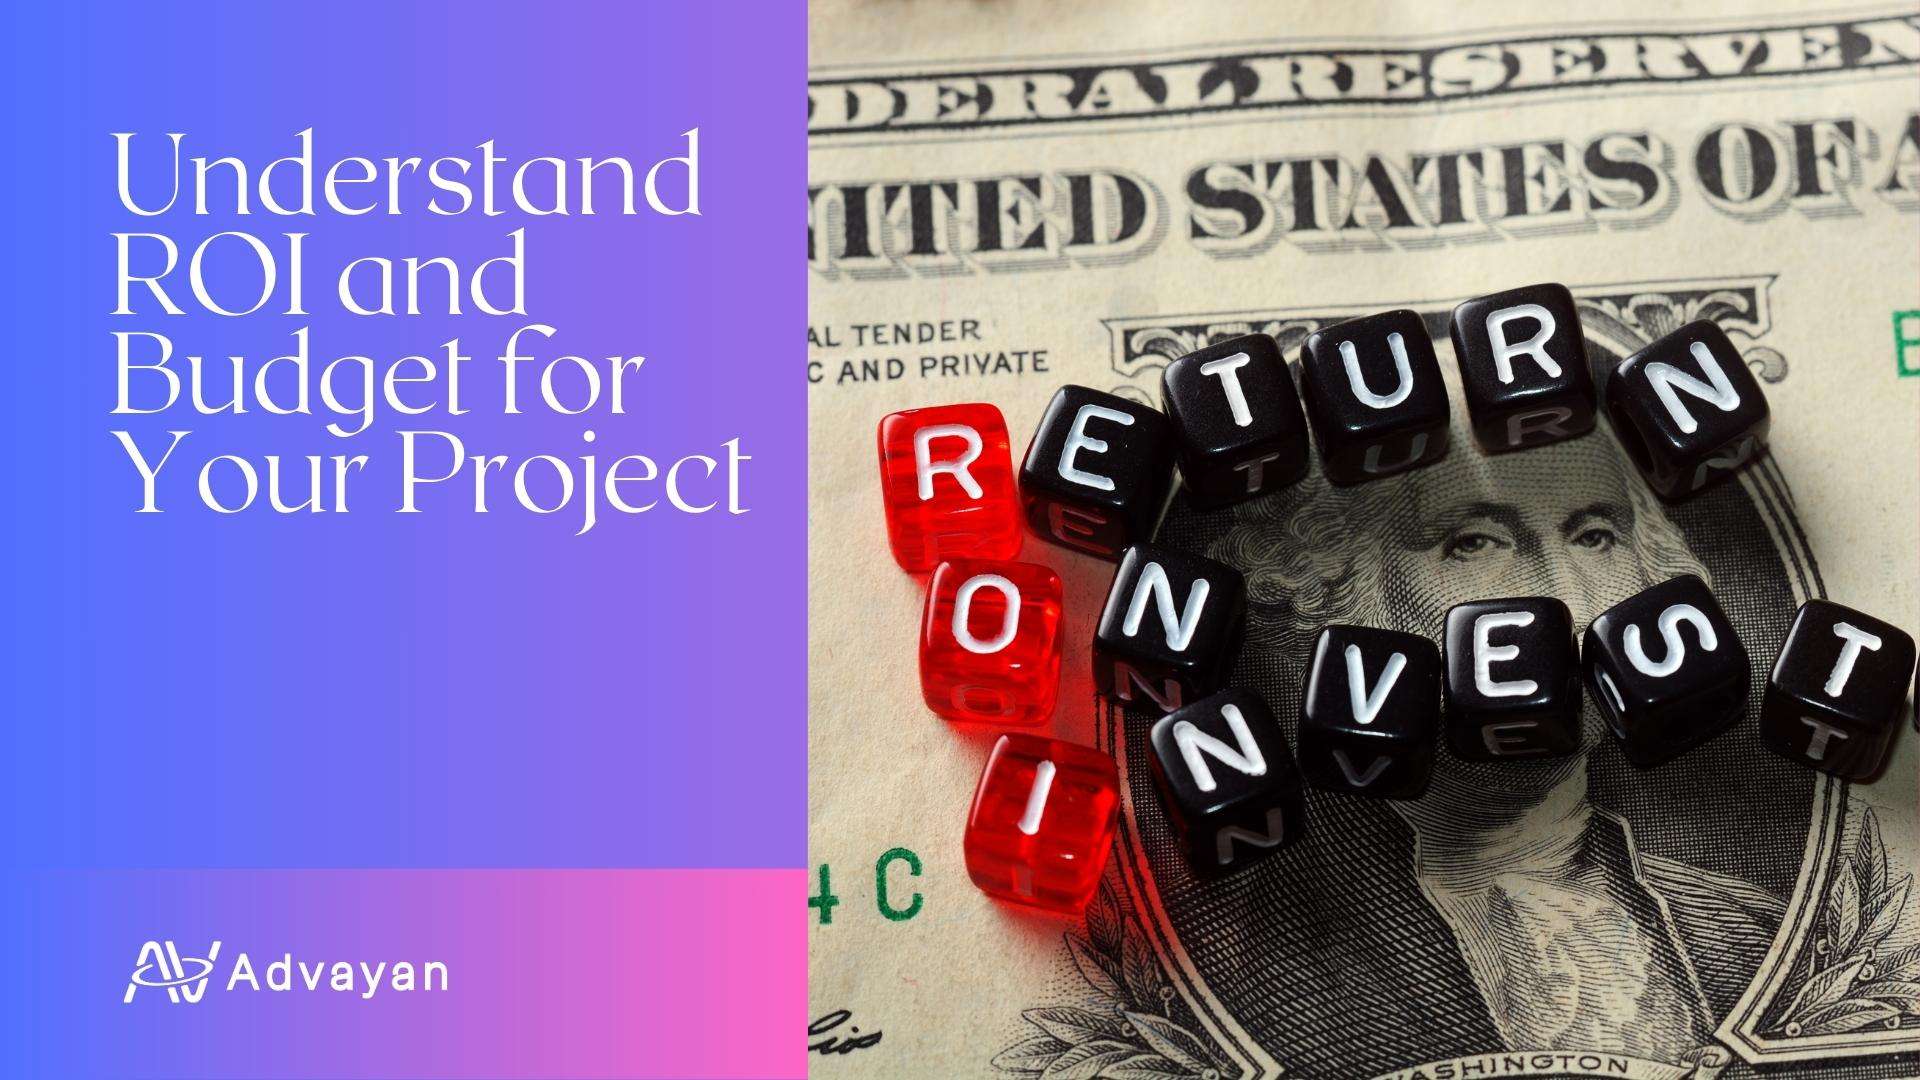 Understand ROI and Budget for Your Project